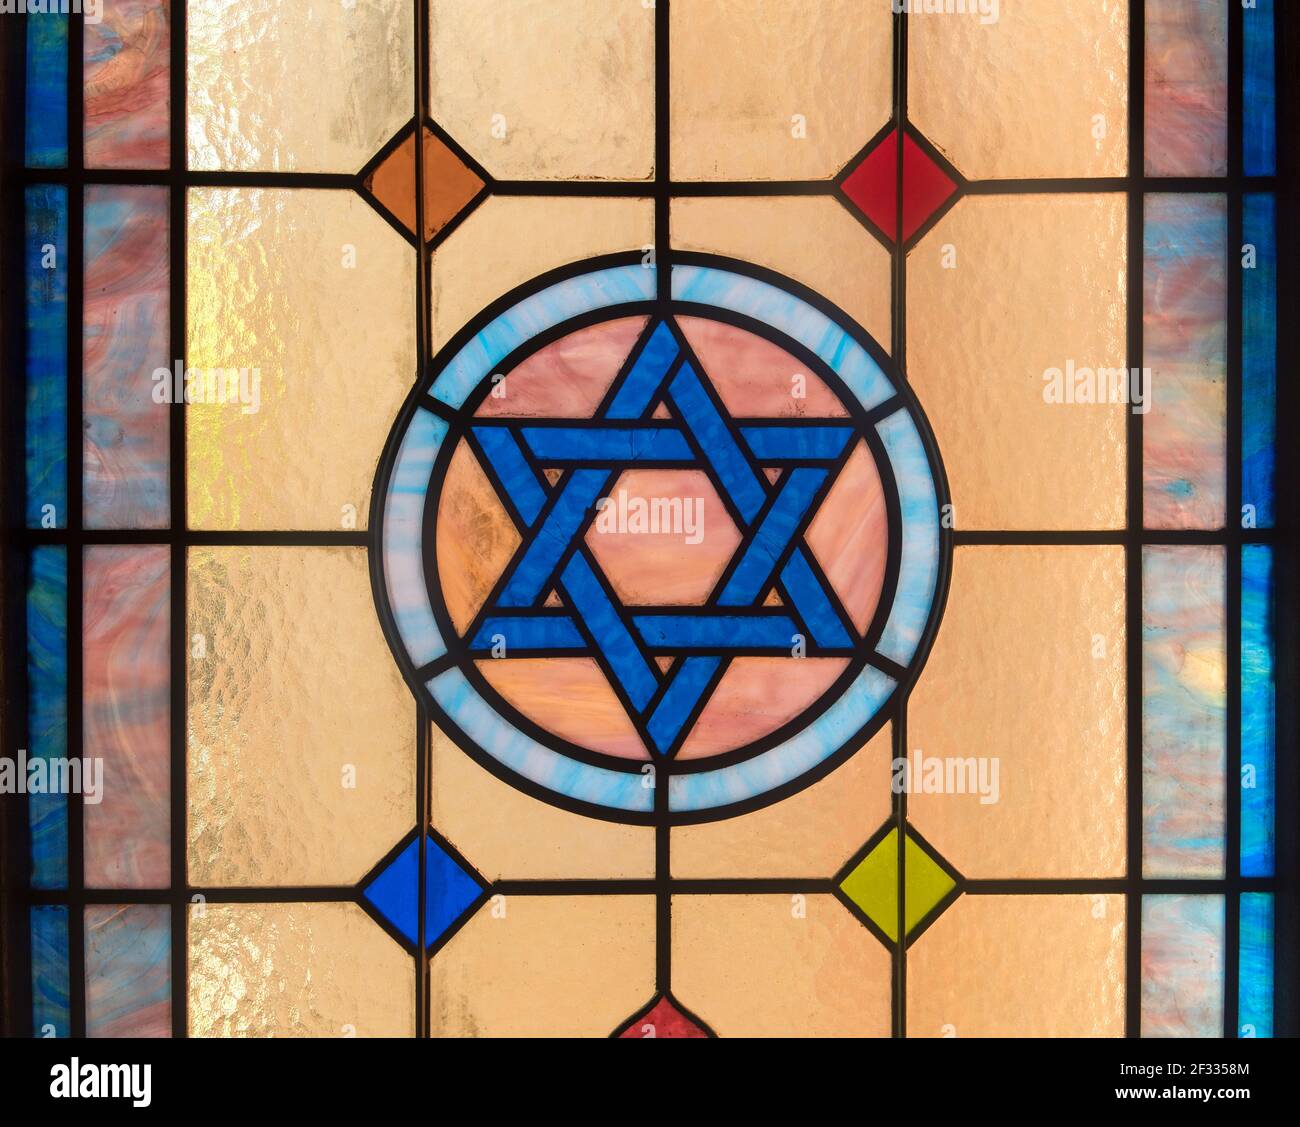 Star of David in Synagogue Stained Glass Window Stock Photo